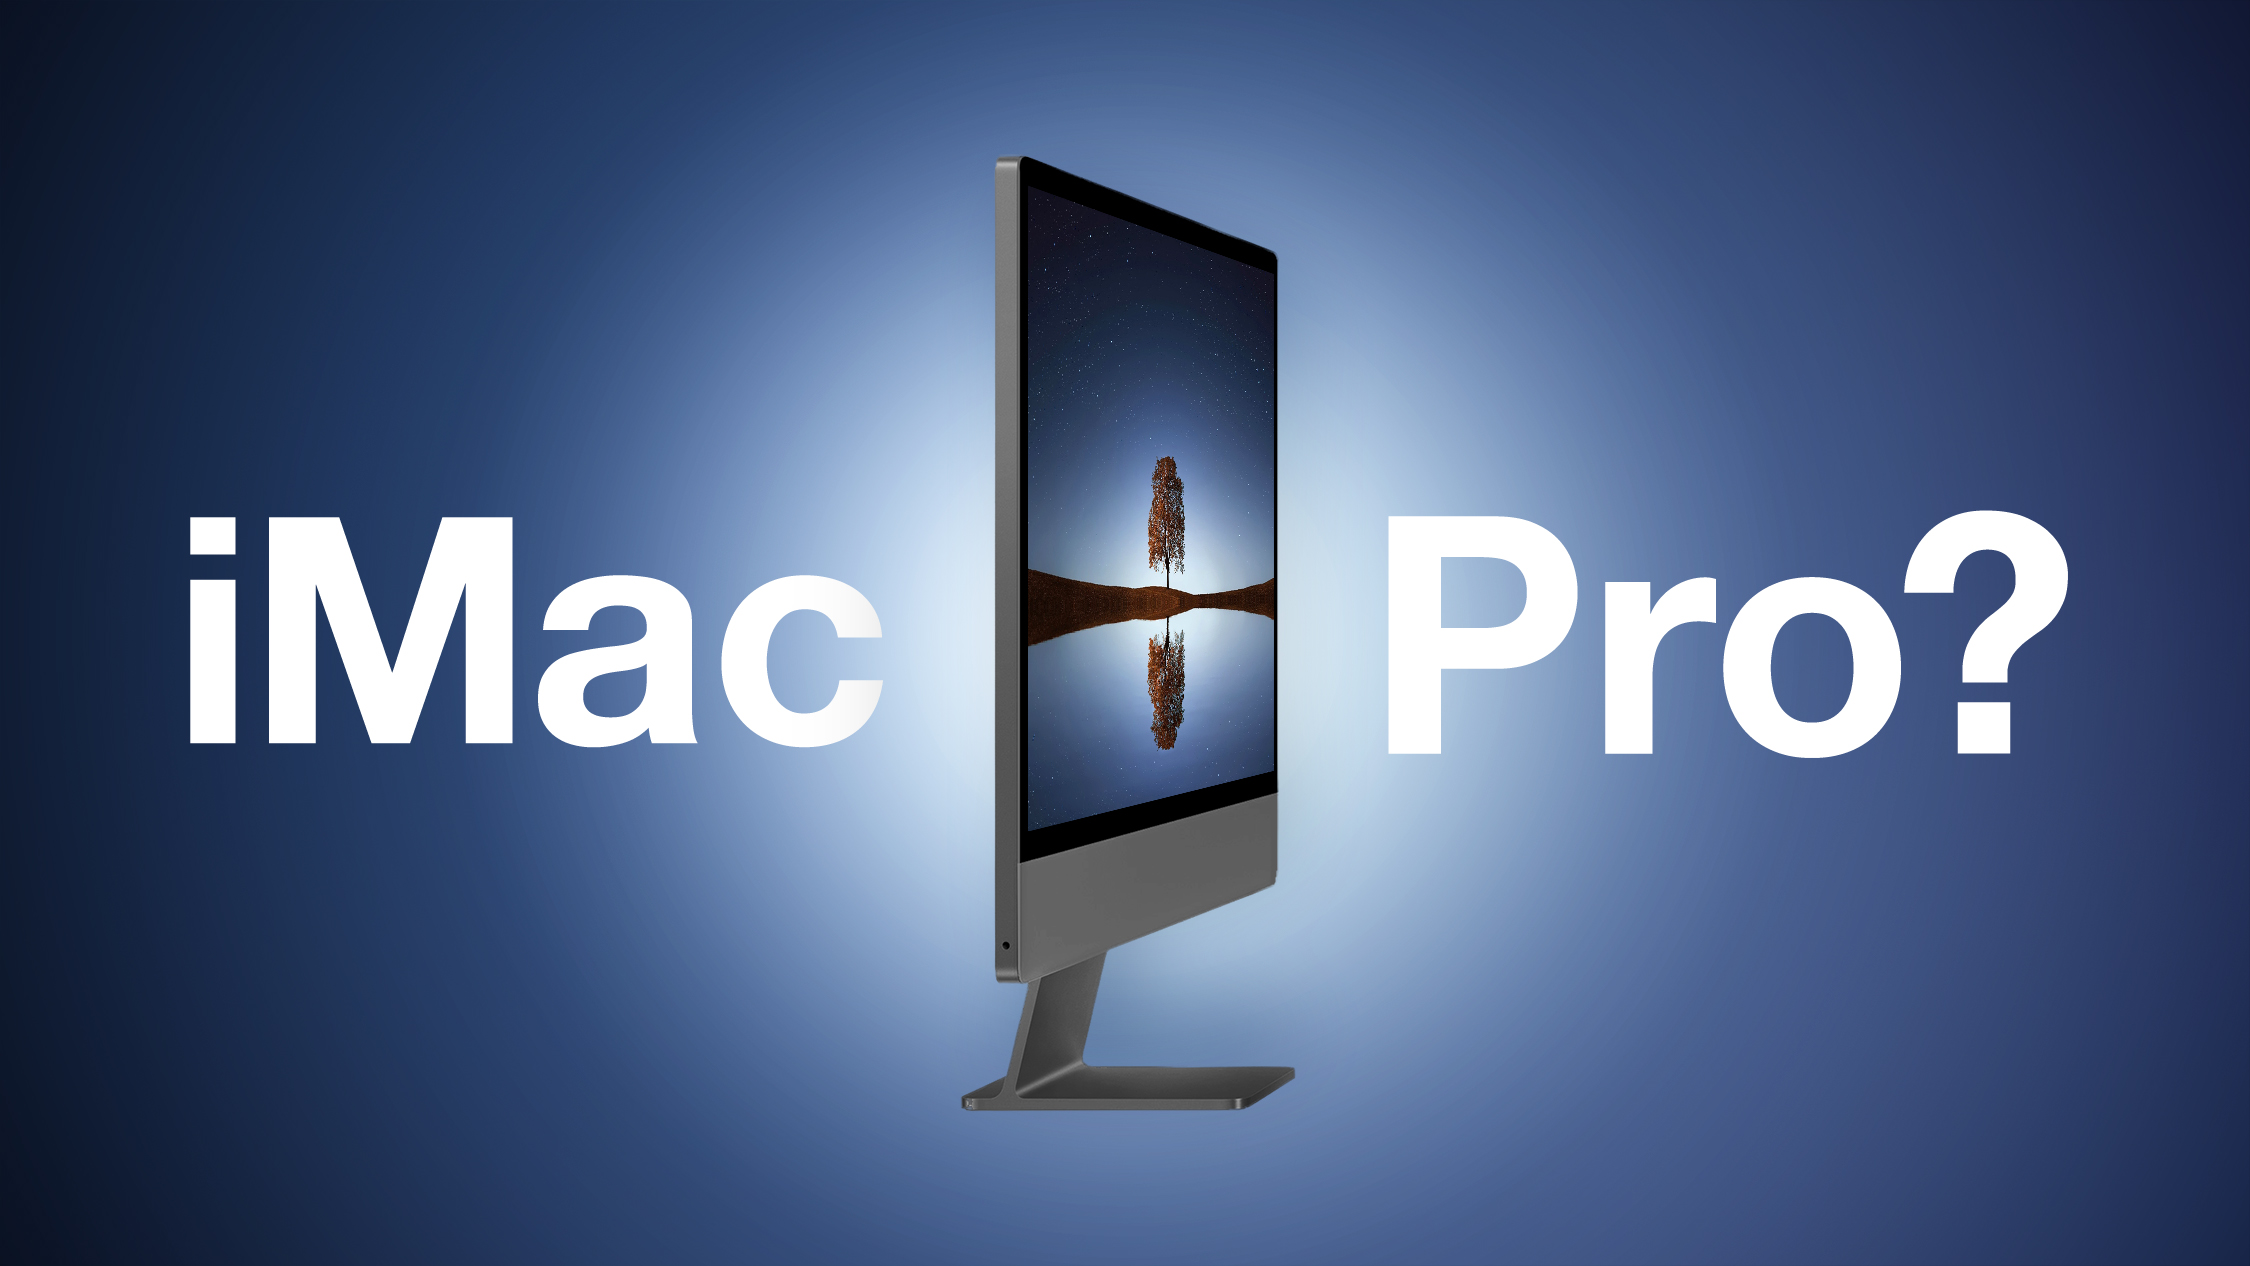 Will There Really Be Another iMac Pro?